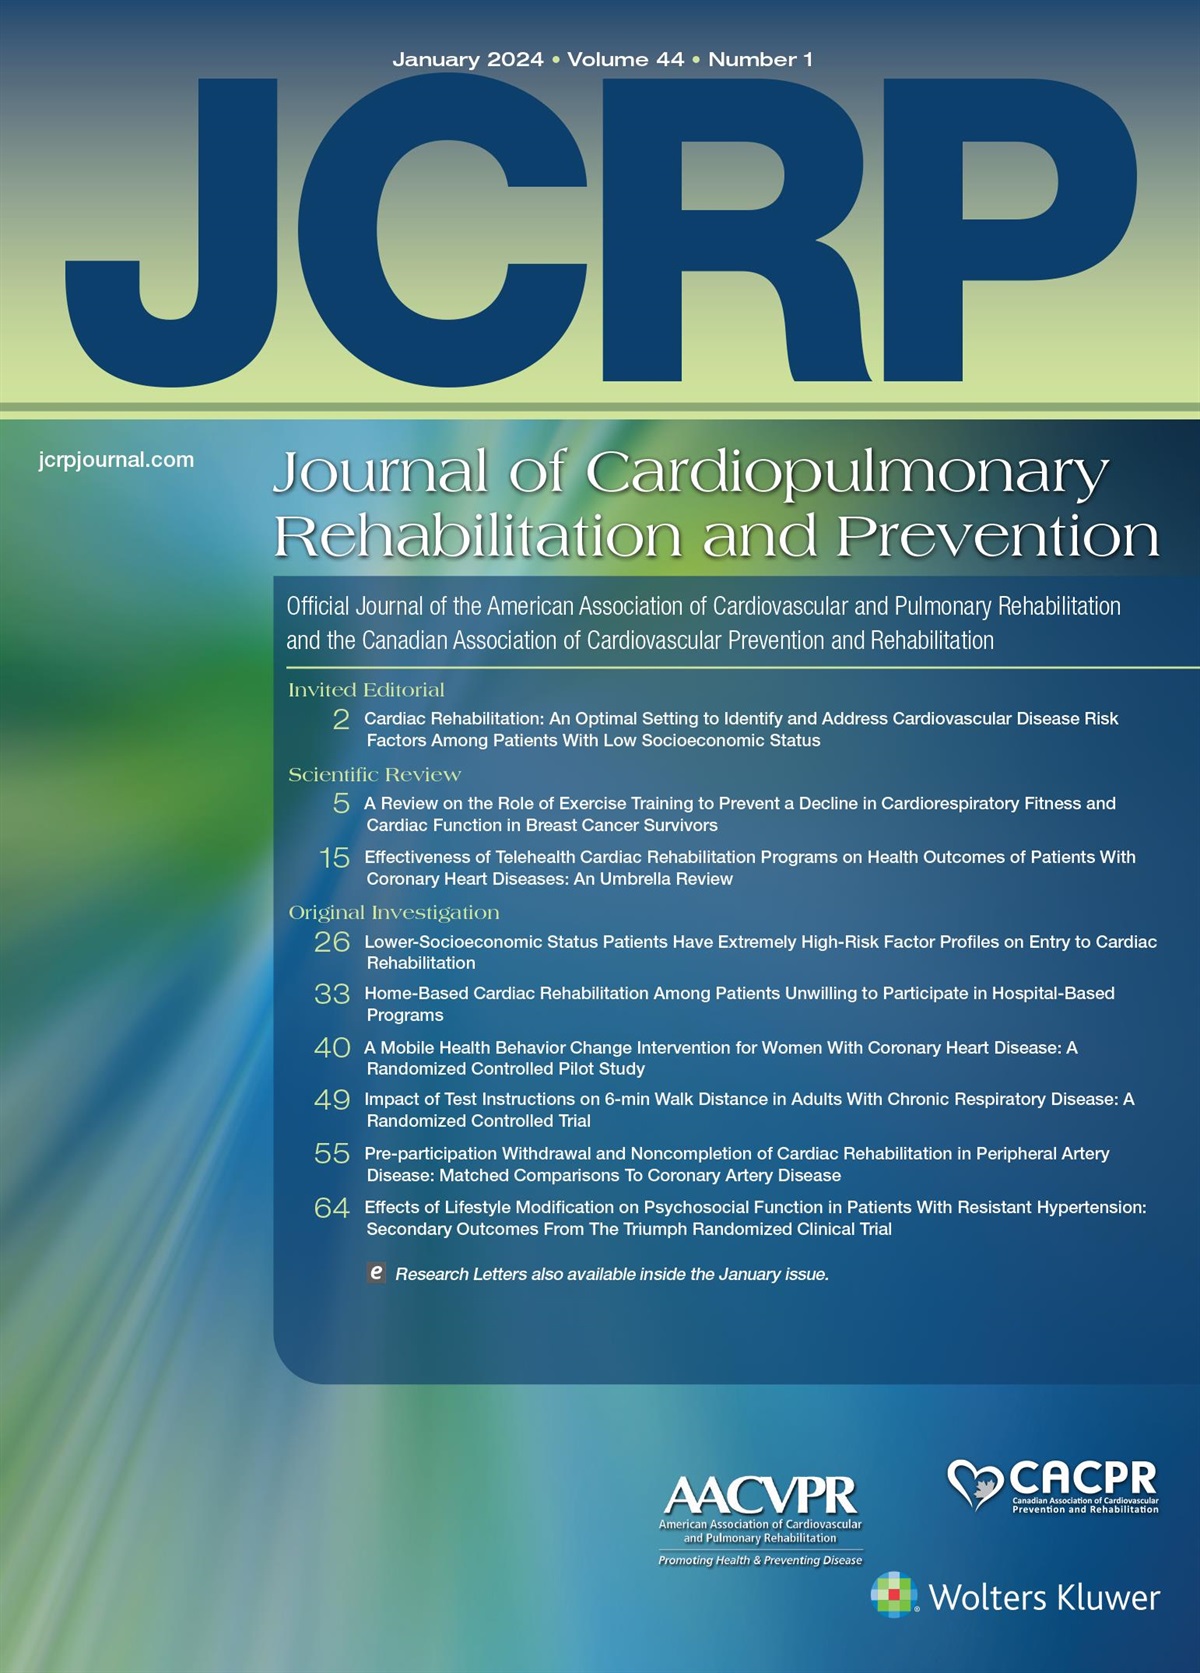 Cardiac Rehabilitation: AN OPTIMAL SETTING TO IDENTIFY AND ADDRESS CARDIOVASCULAR DISEASE RISK FACTORS AMONG PATIENTS WITH LOW SOCIOECONOMIC STATUS